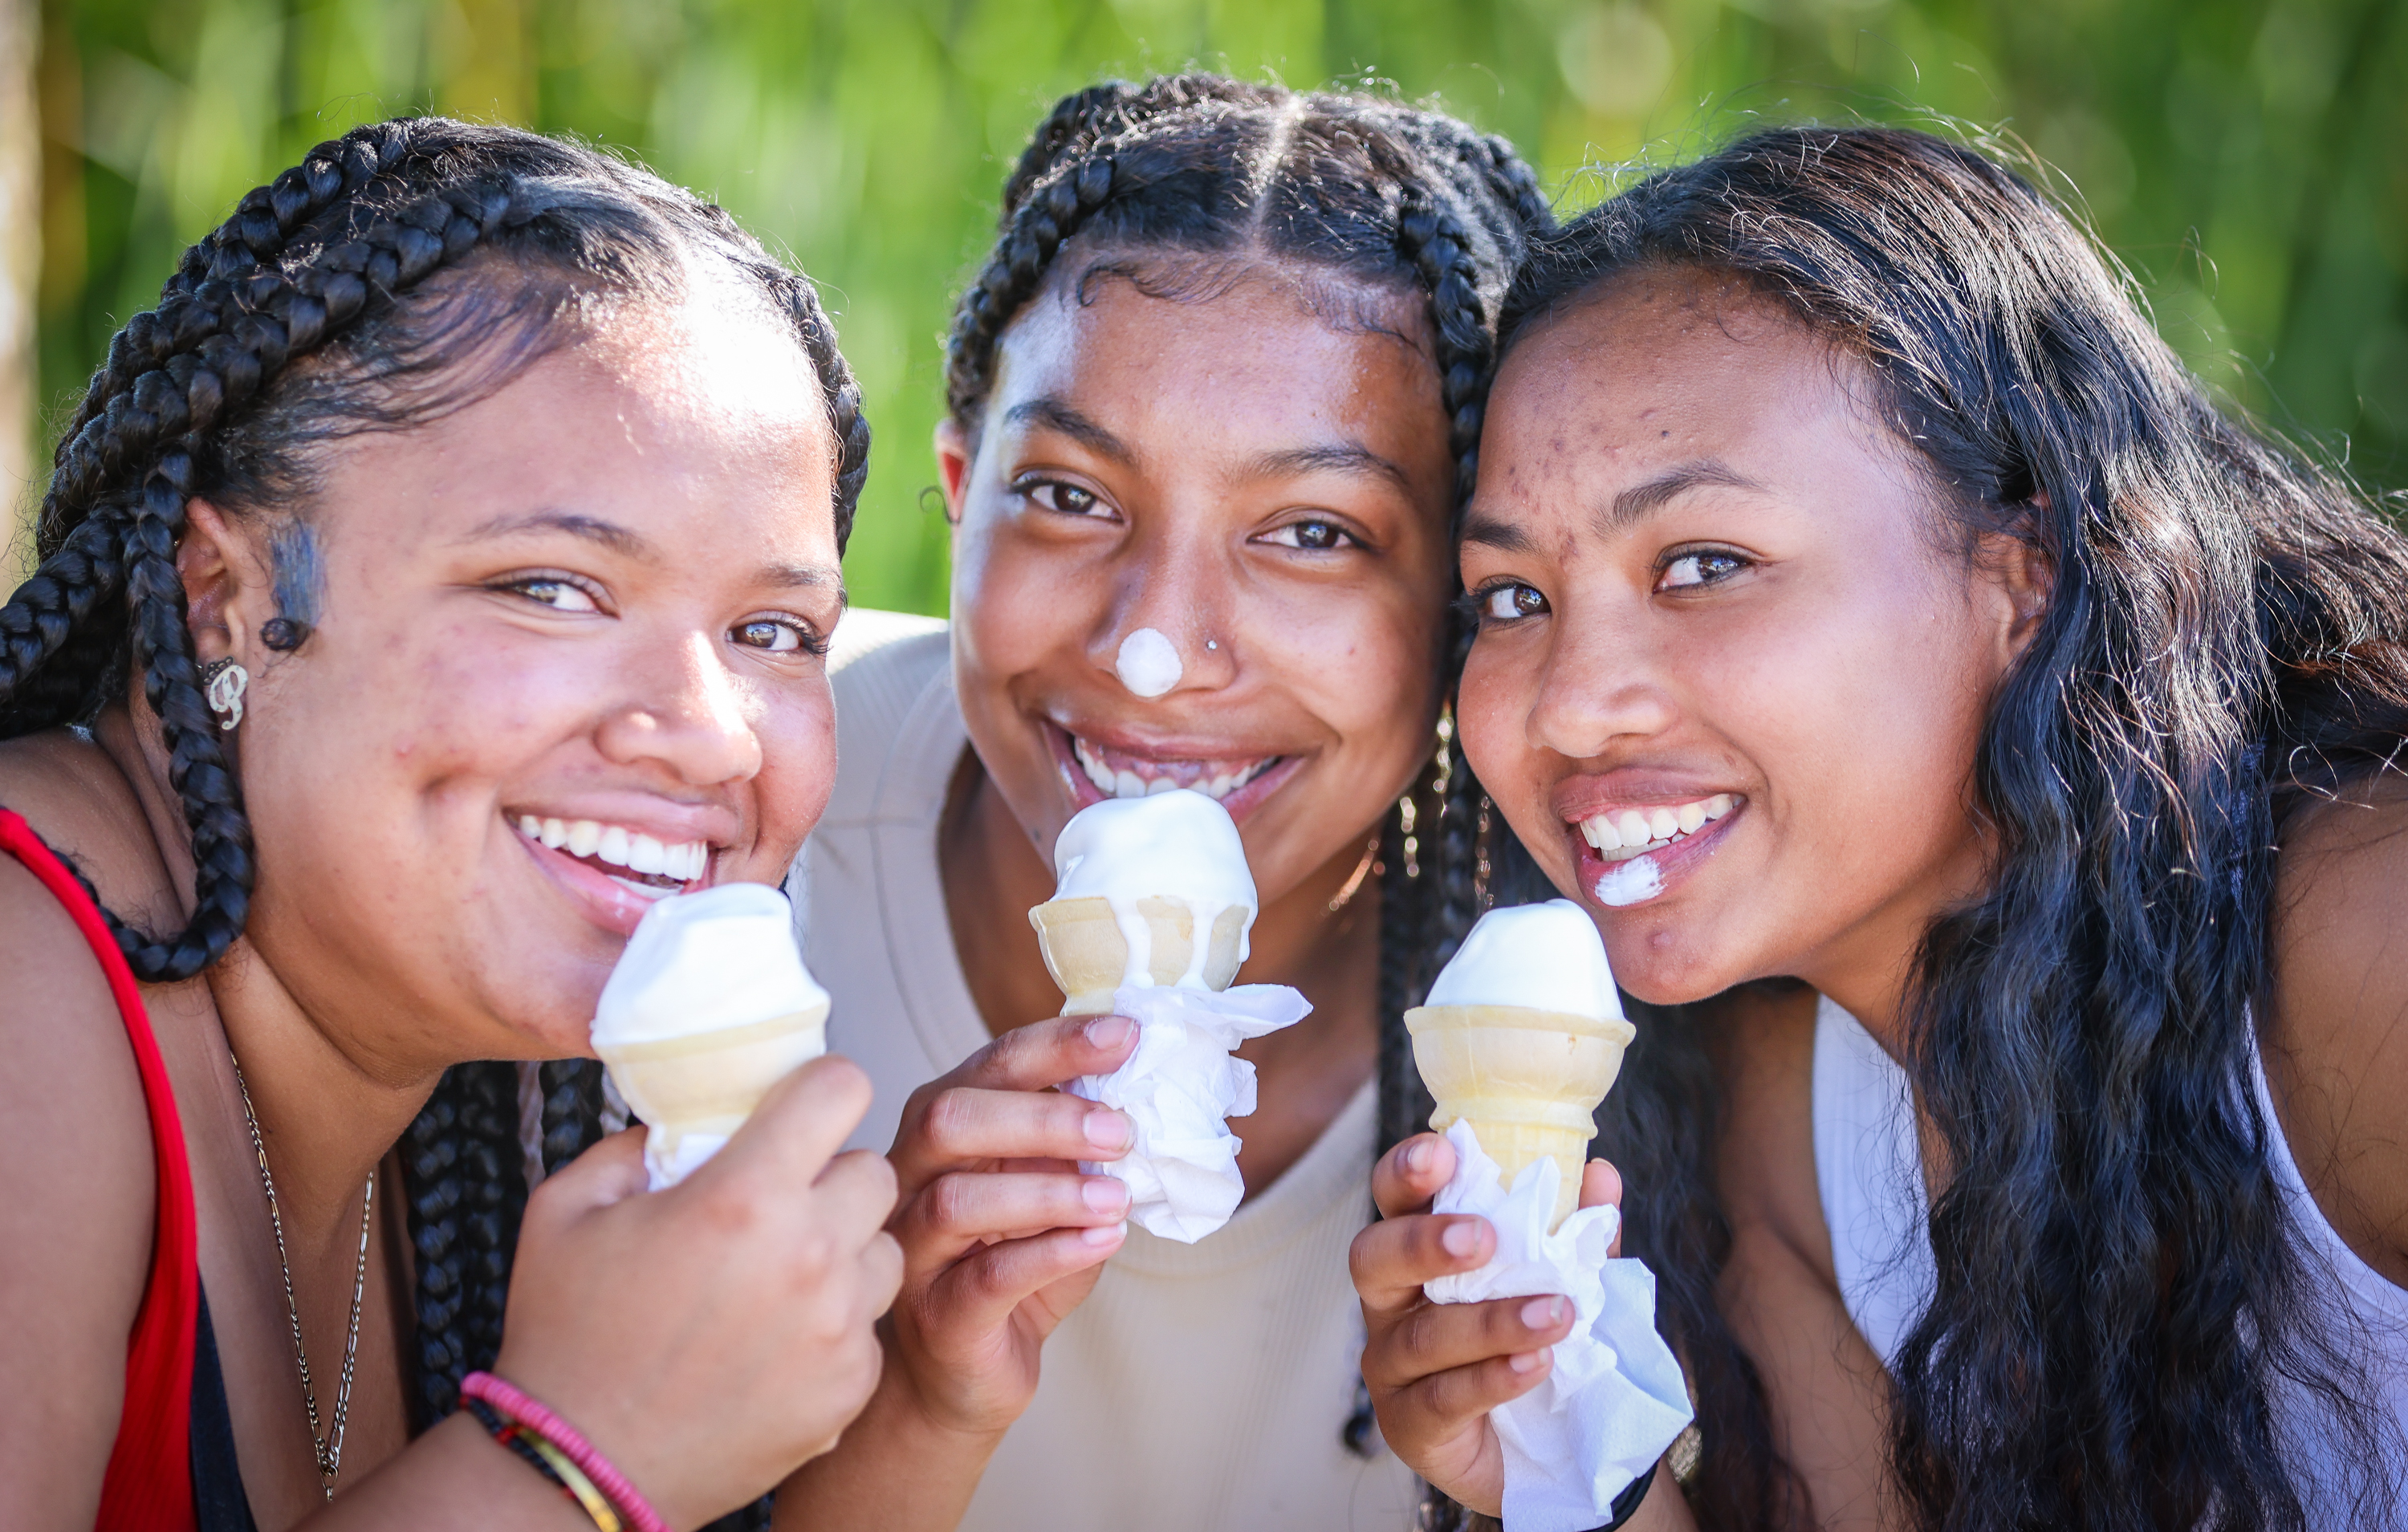 Three teenage girls hold up ice cream cones and smile during the fair.